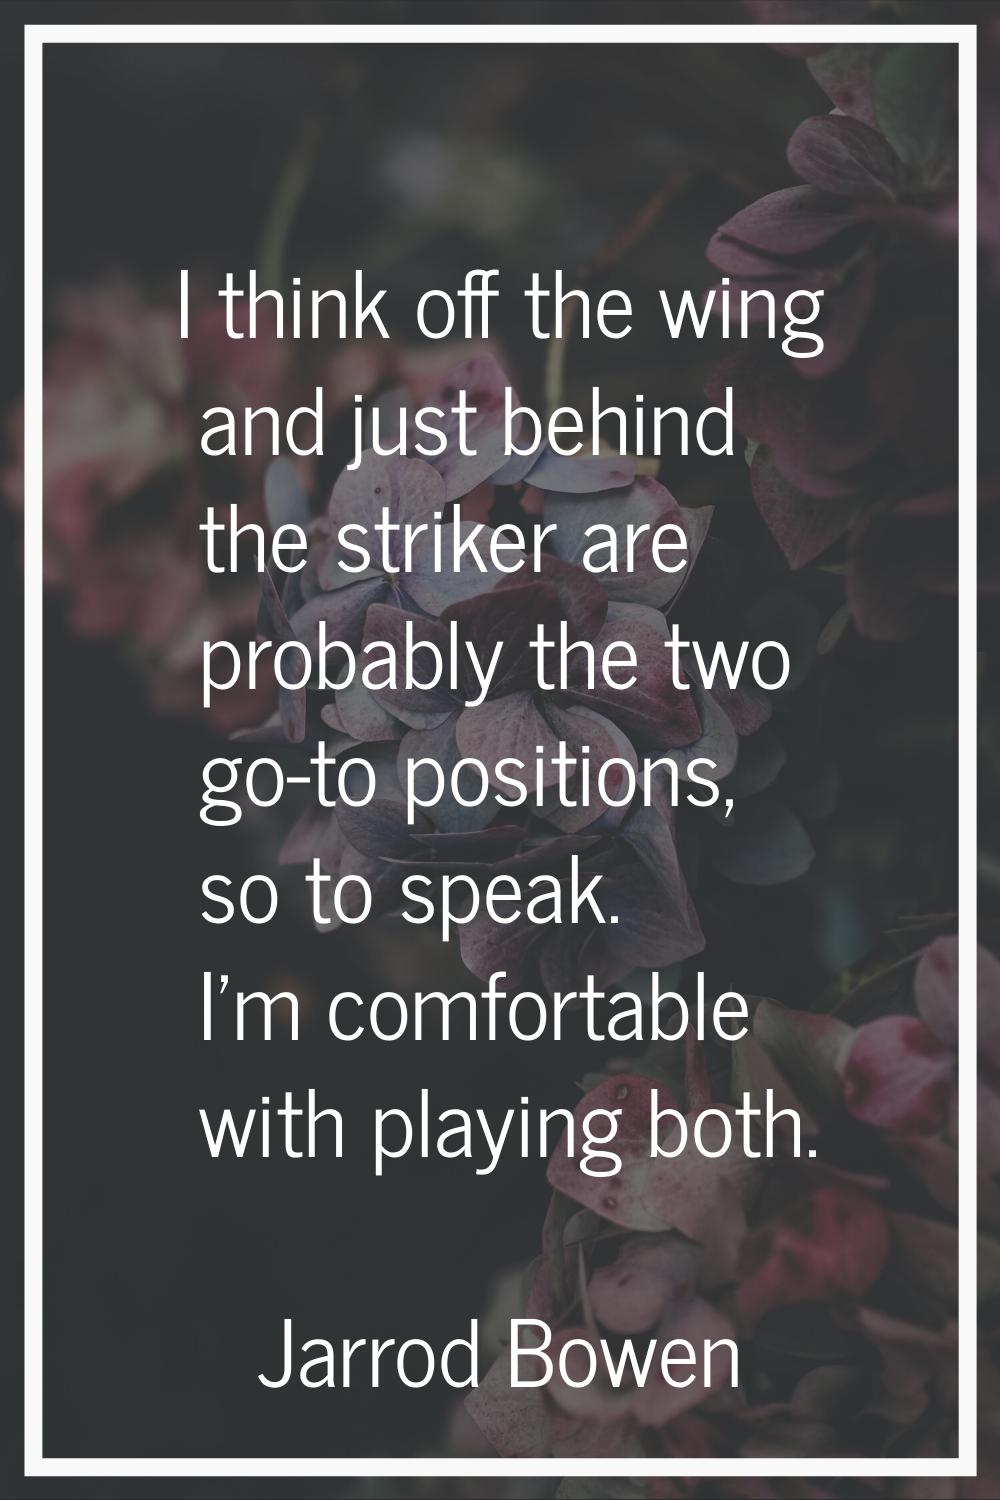 I think off the wing and just behind the striker are probably the two go-to positions, so to speak.